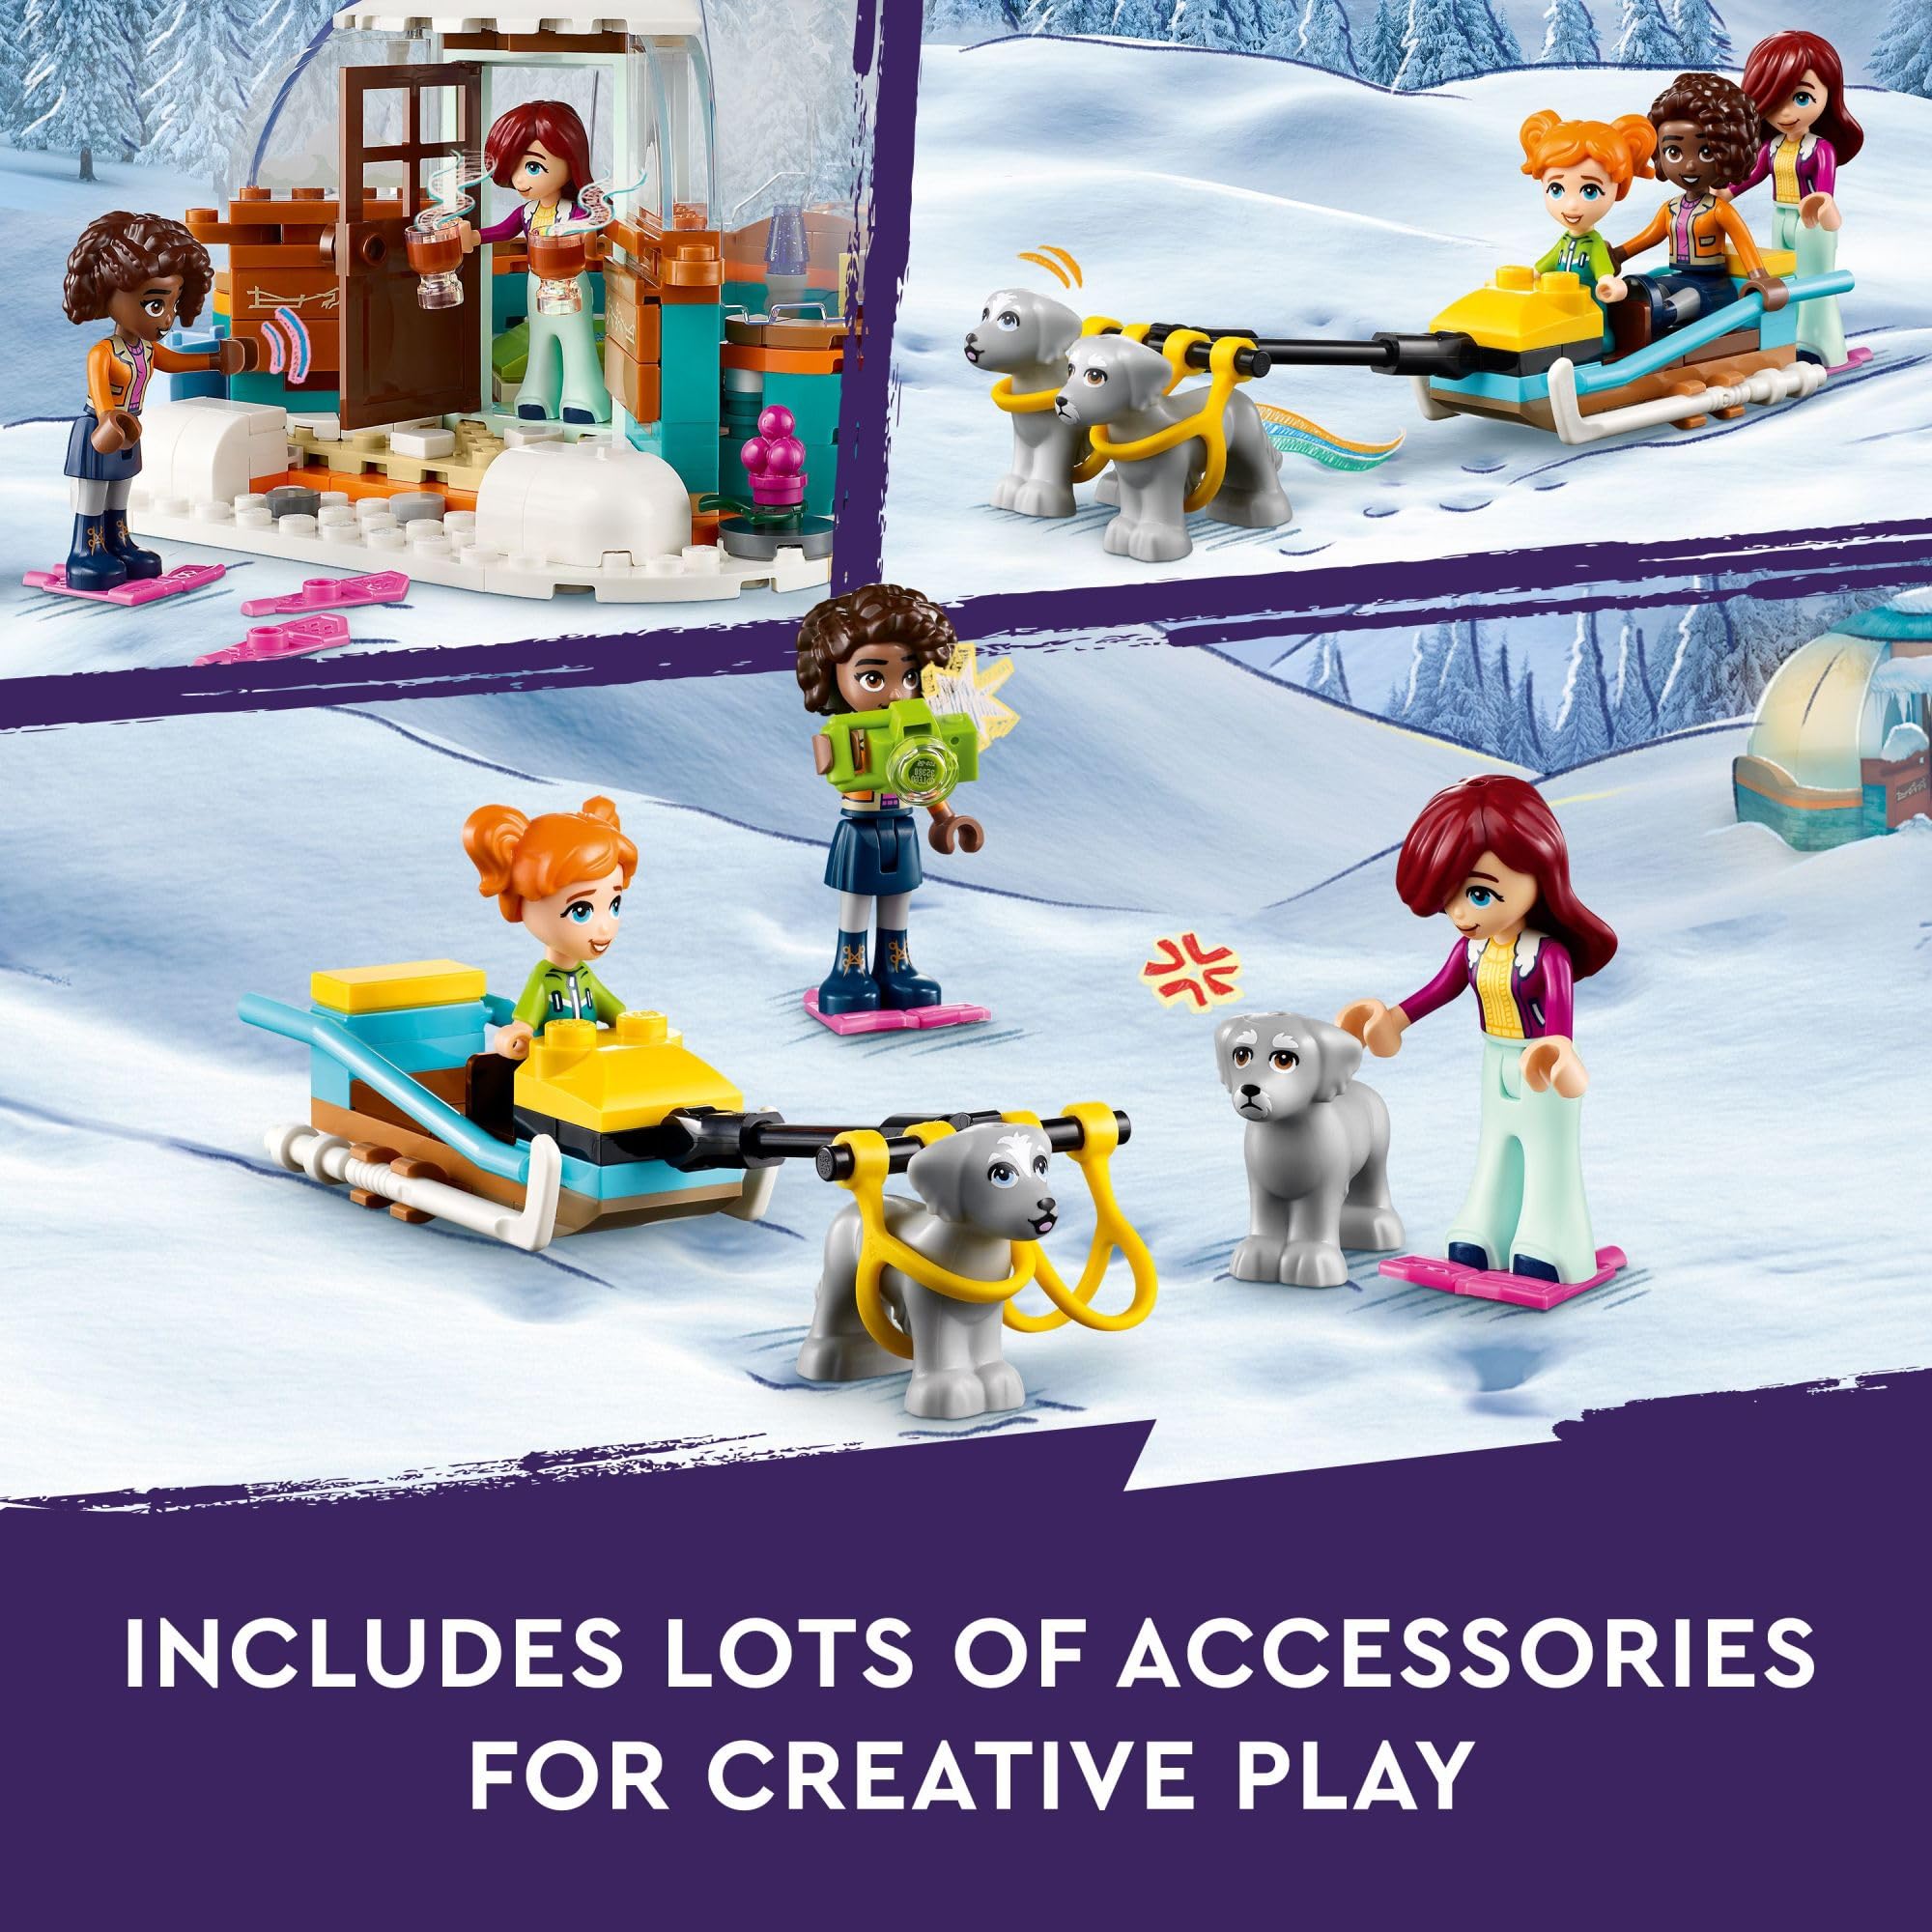 LEGO Friends Igloo Holiday Adventure 41760 Building Toy Set for Ages 8+, with 3 Dolls, 2 Dog Characters, A Winter Themed Gift for Kids 8-10 Who Love Snowy Adventures, Dog Sledding and Pretend Play